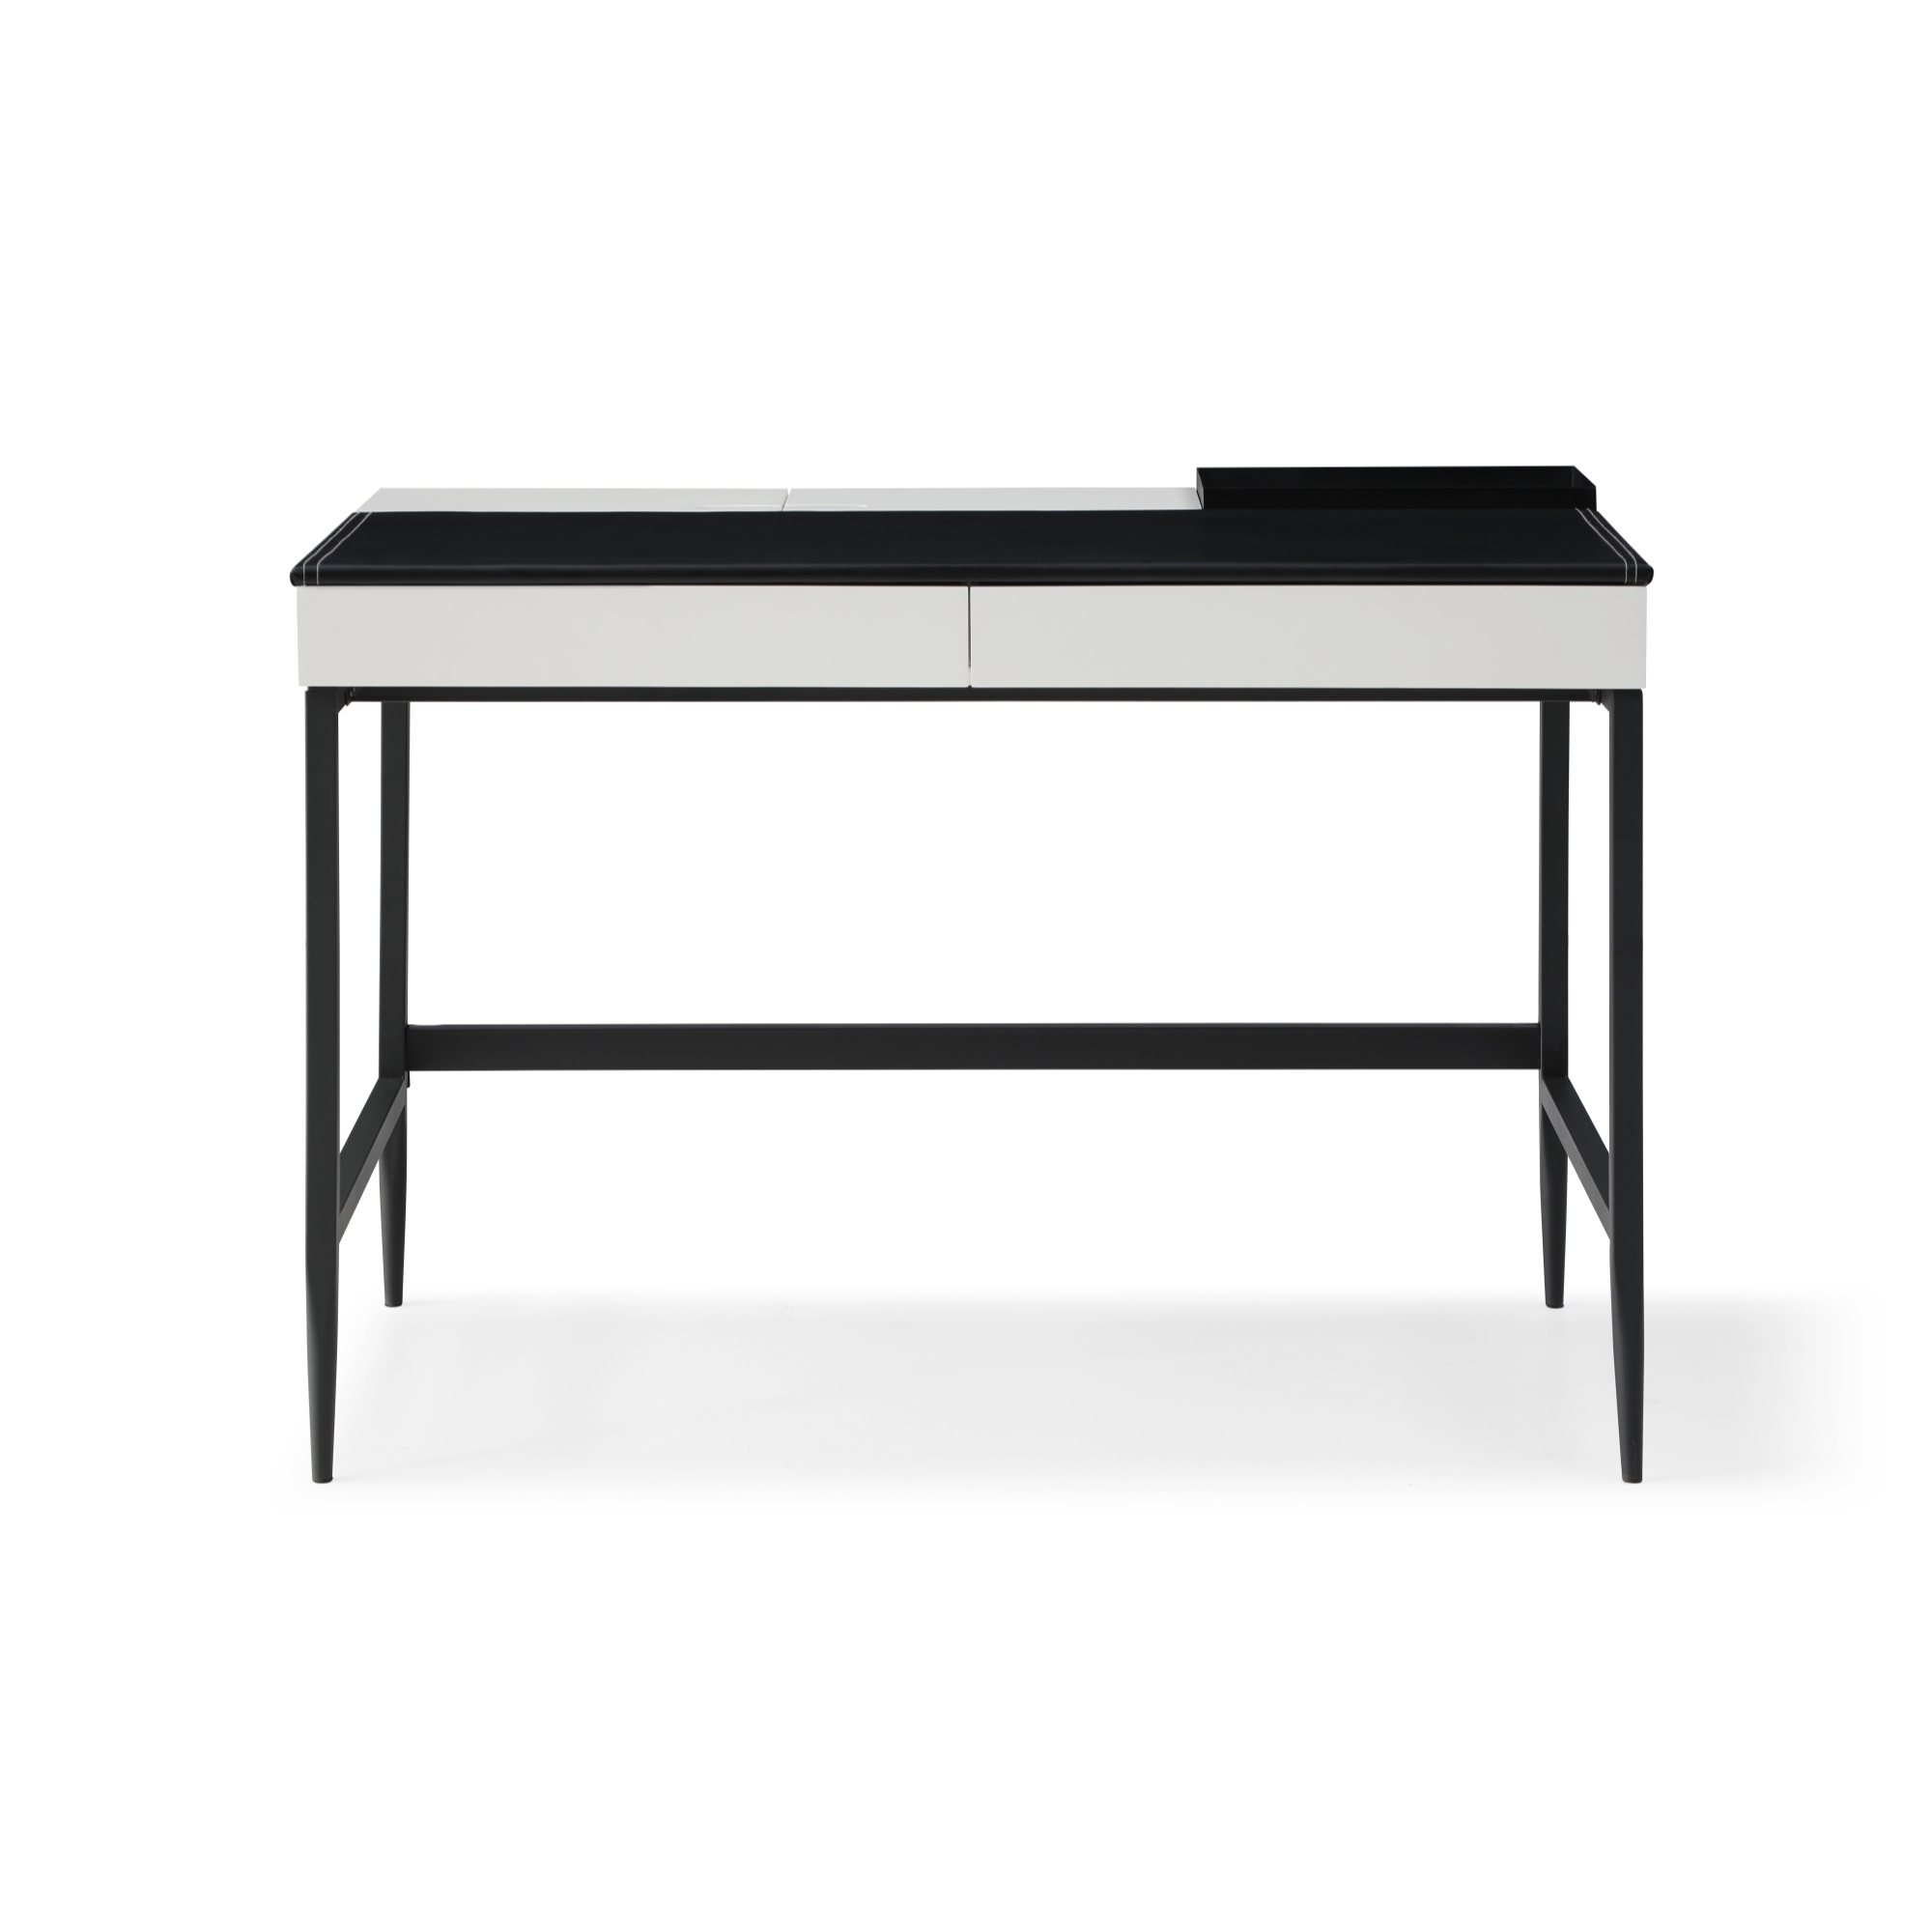 Duane Desk-2 Storage Drawers-Storage Compartments With Hinged Lid-Leather Desk Pad - Black/grey